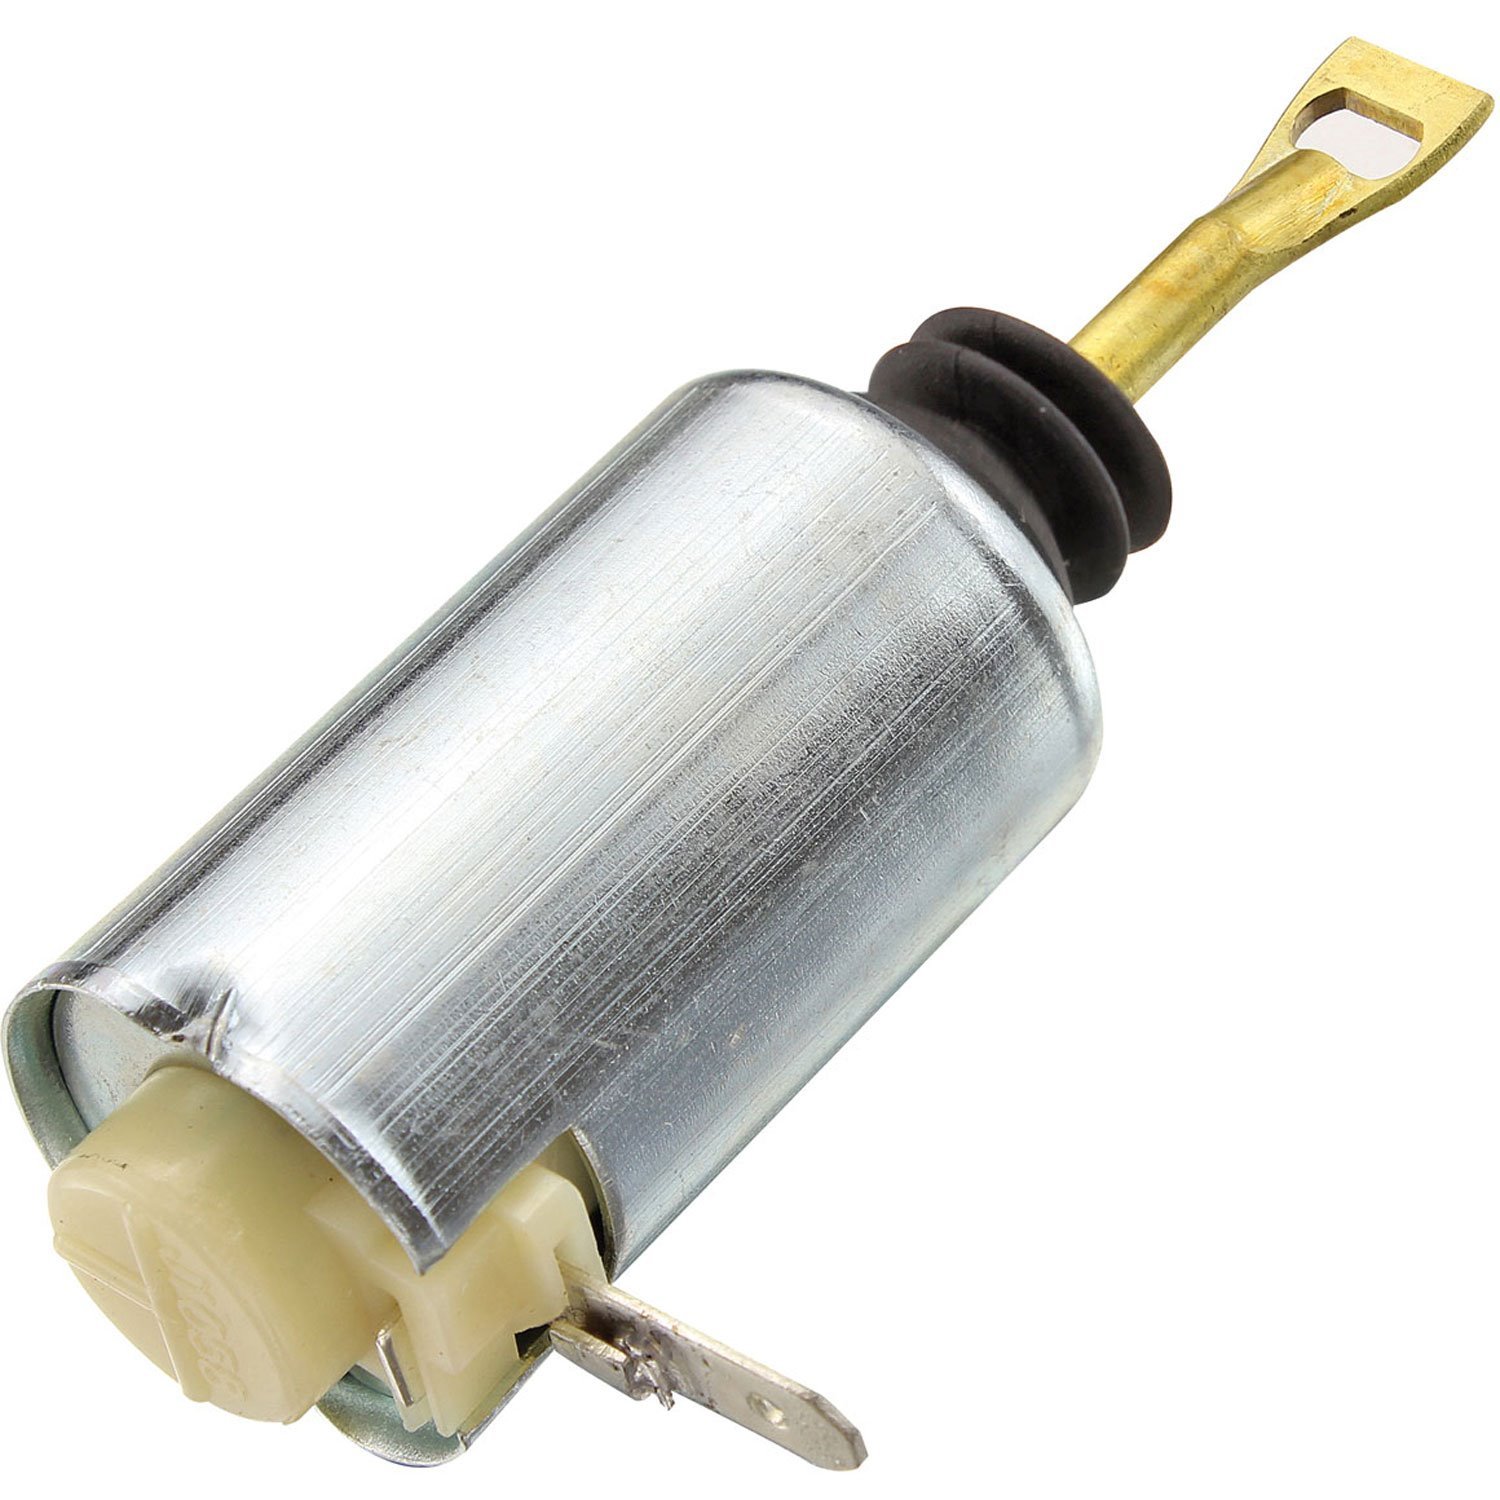 Solenoid Cowl Induction System 1970-72 Chevelle/El Camino